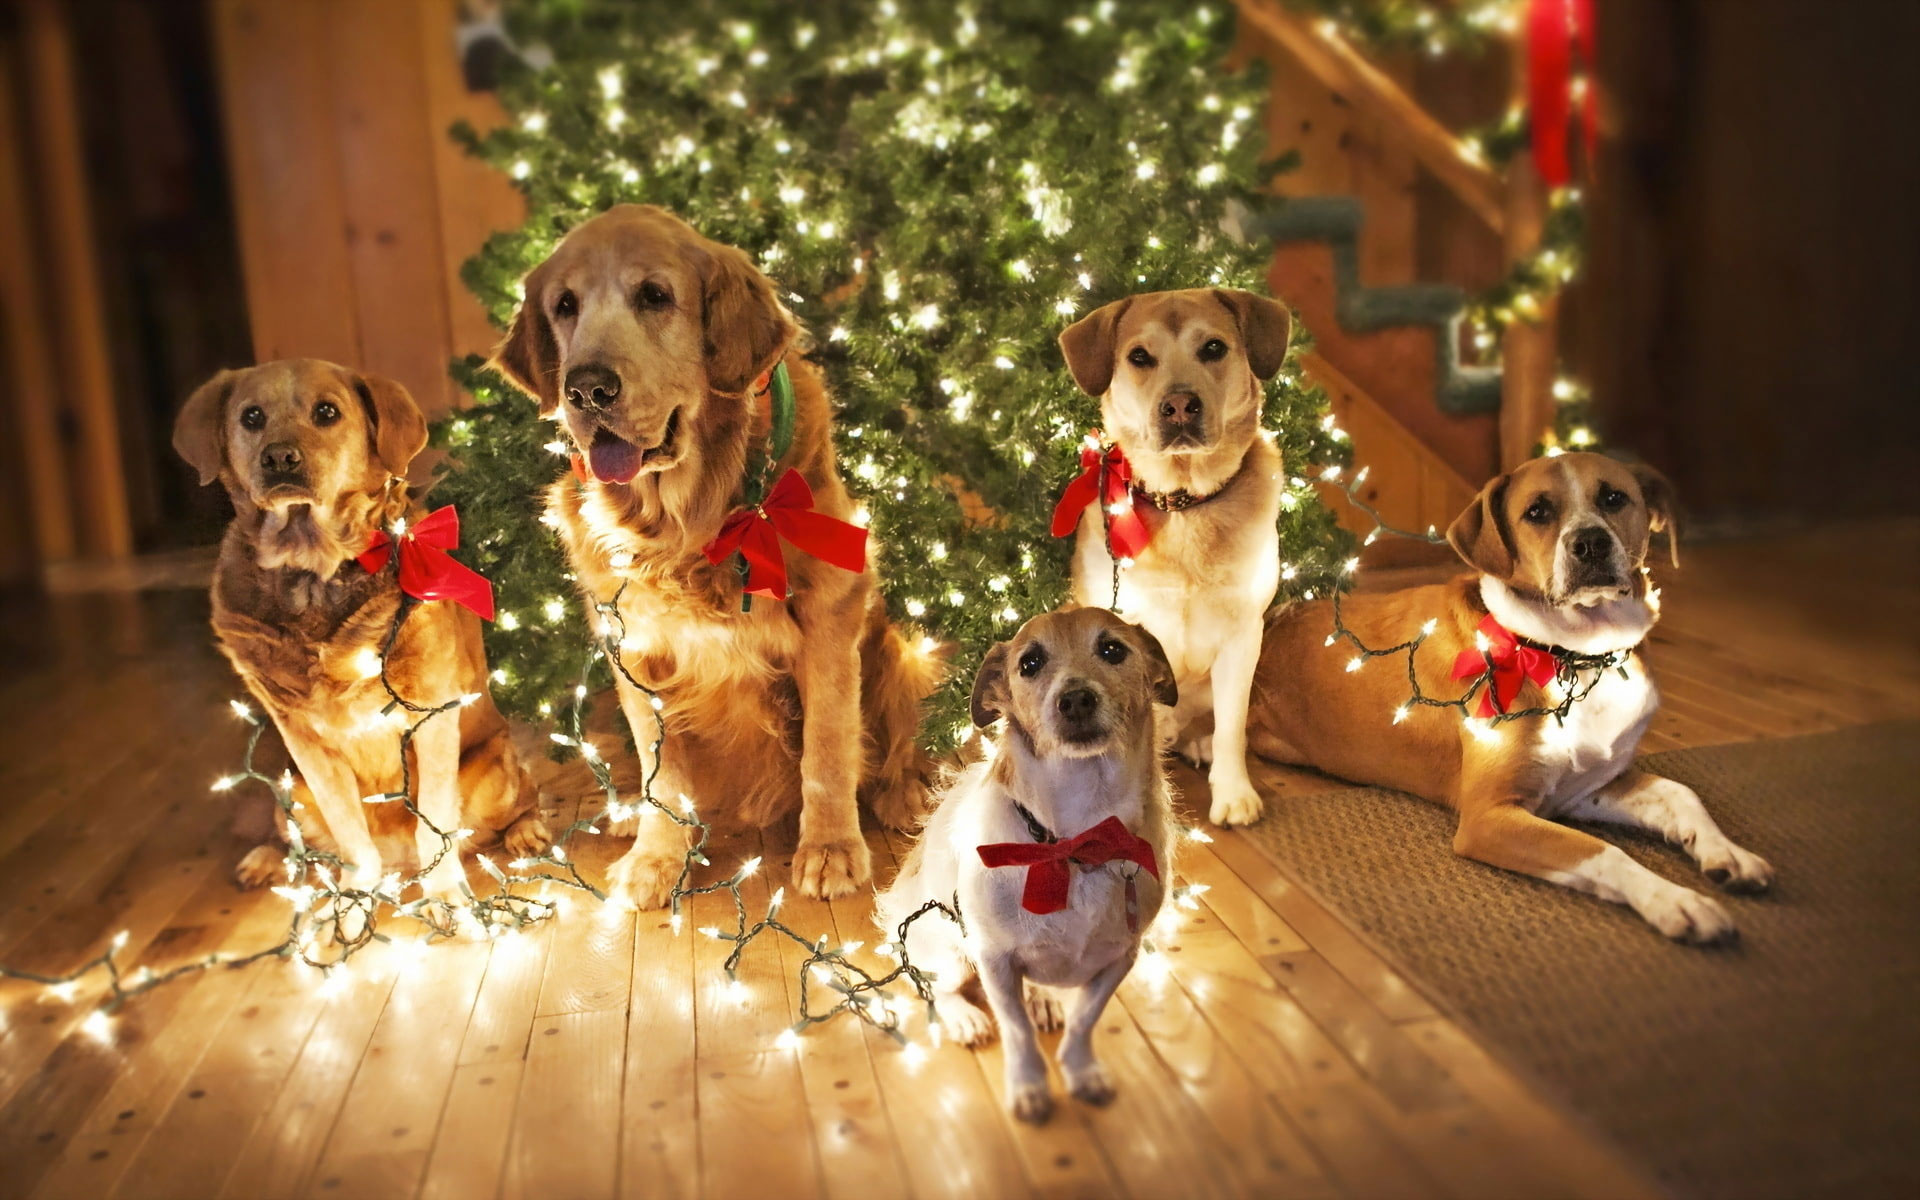 Dogs Waiting for Santa wallpaper, puppy, cute dogs, funny background, christmas lights